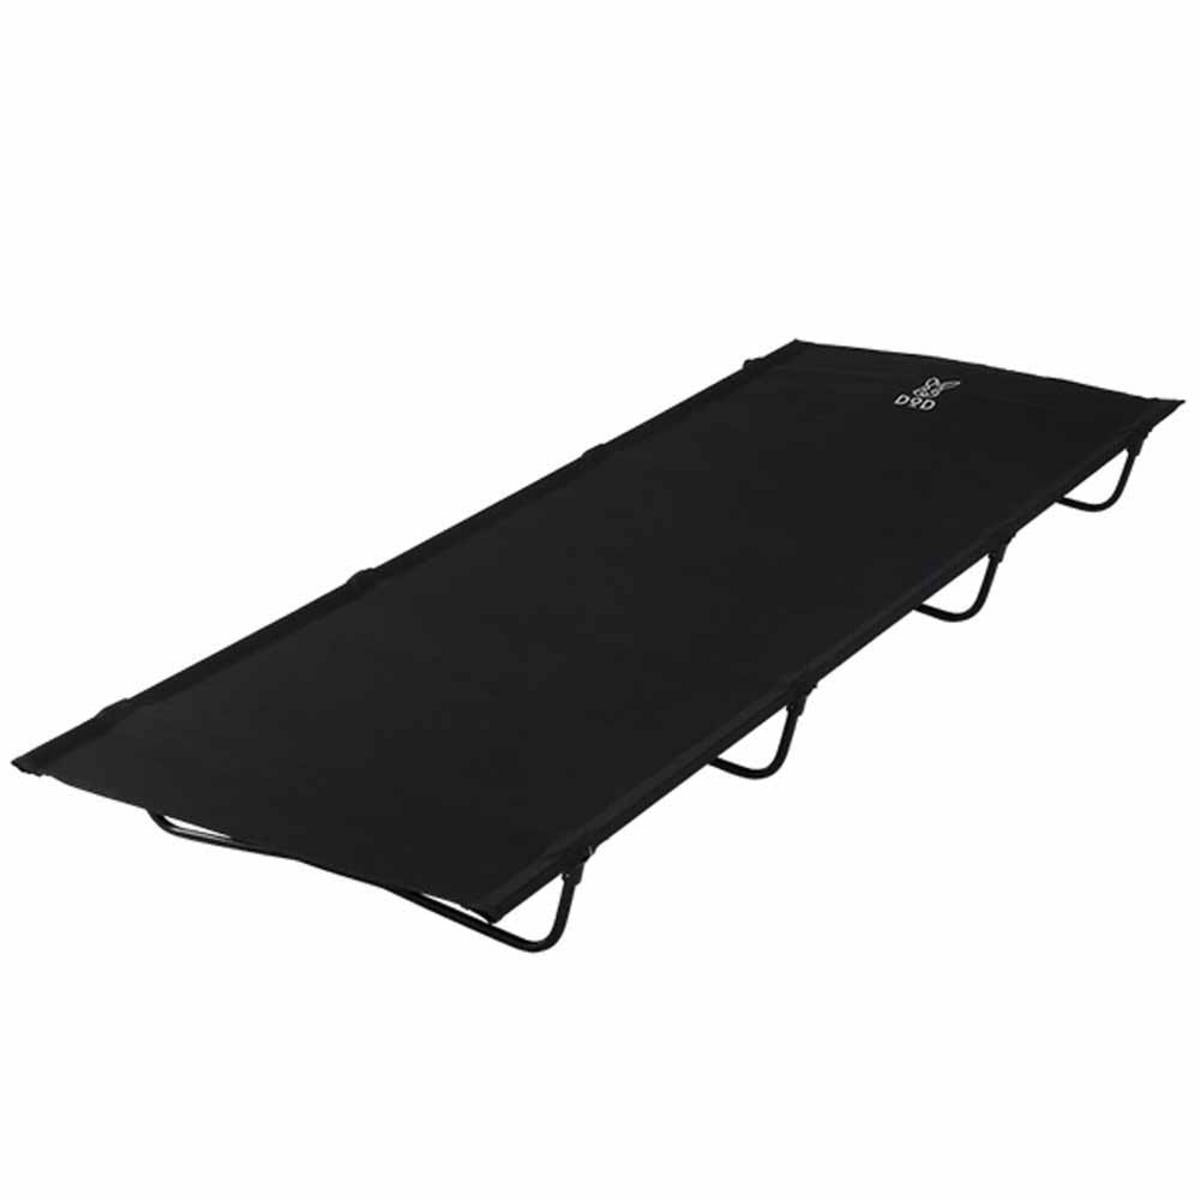 DOD Outdoors Bed in Bag